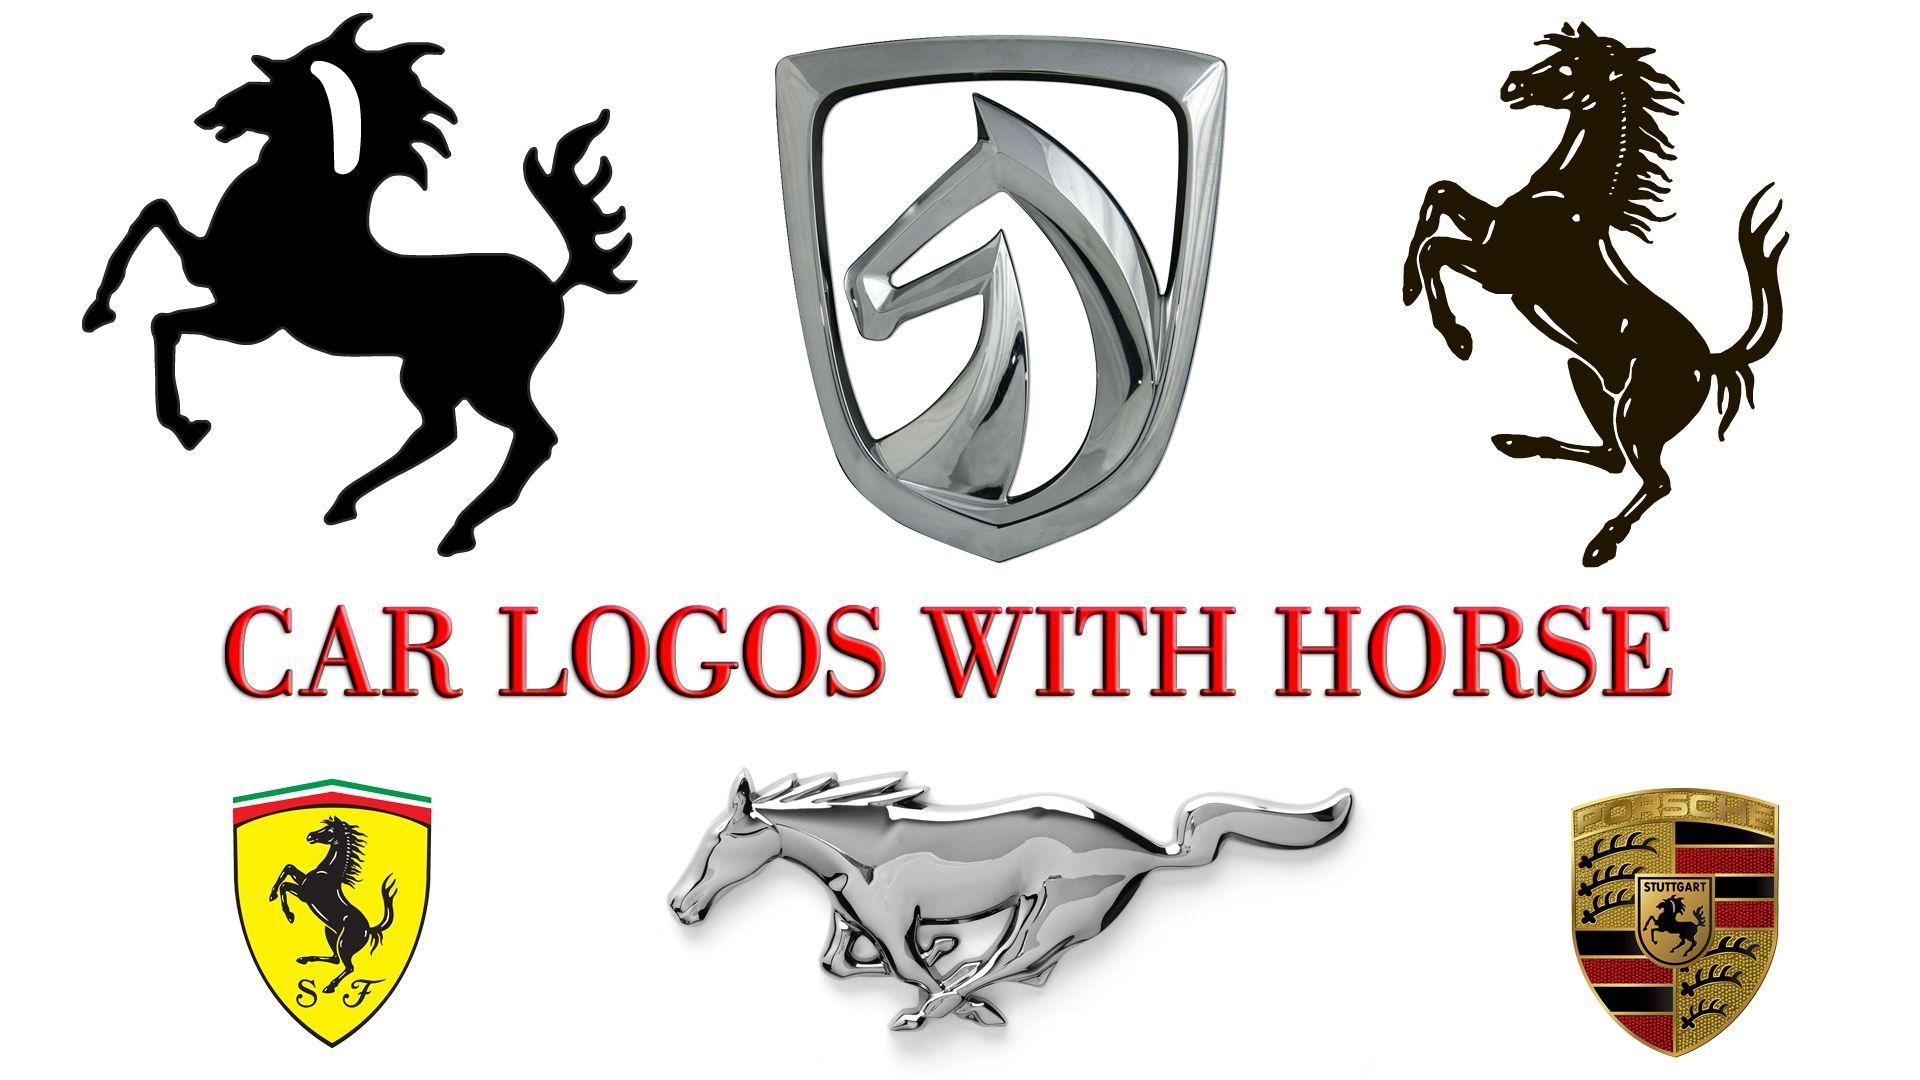 Stallion Car Logo - Car Logos with Horse. No matter what your company specializes